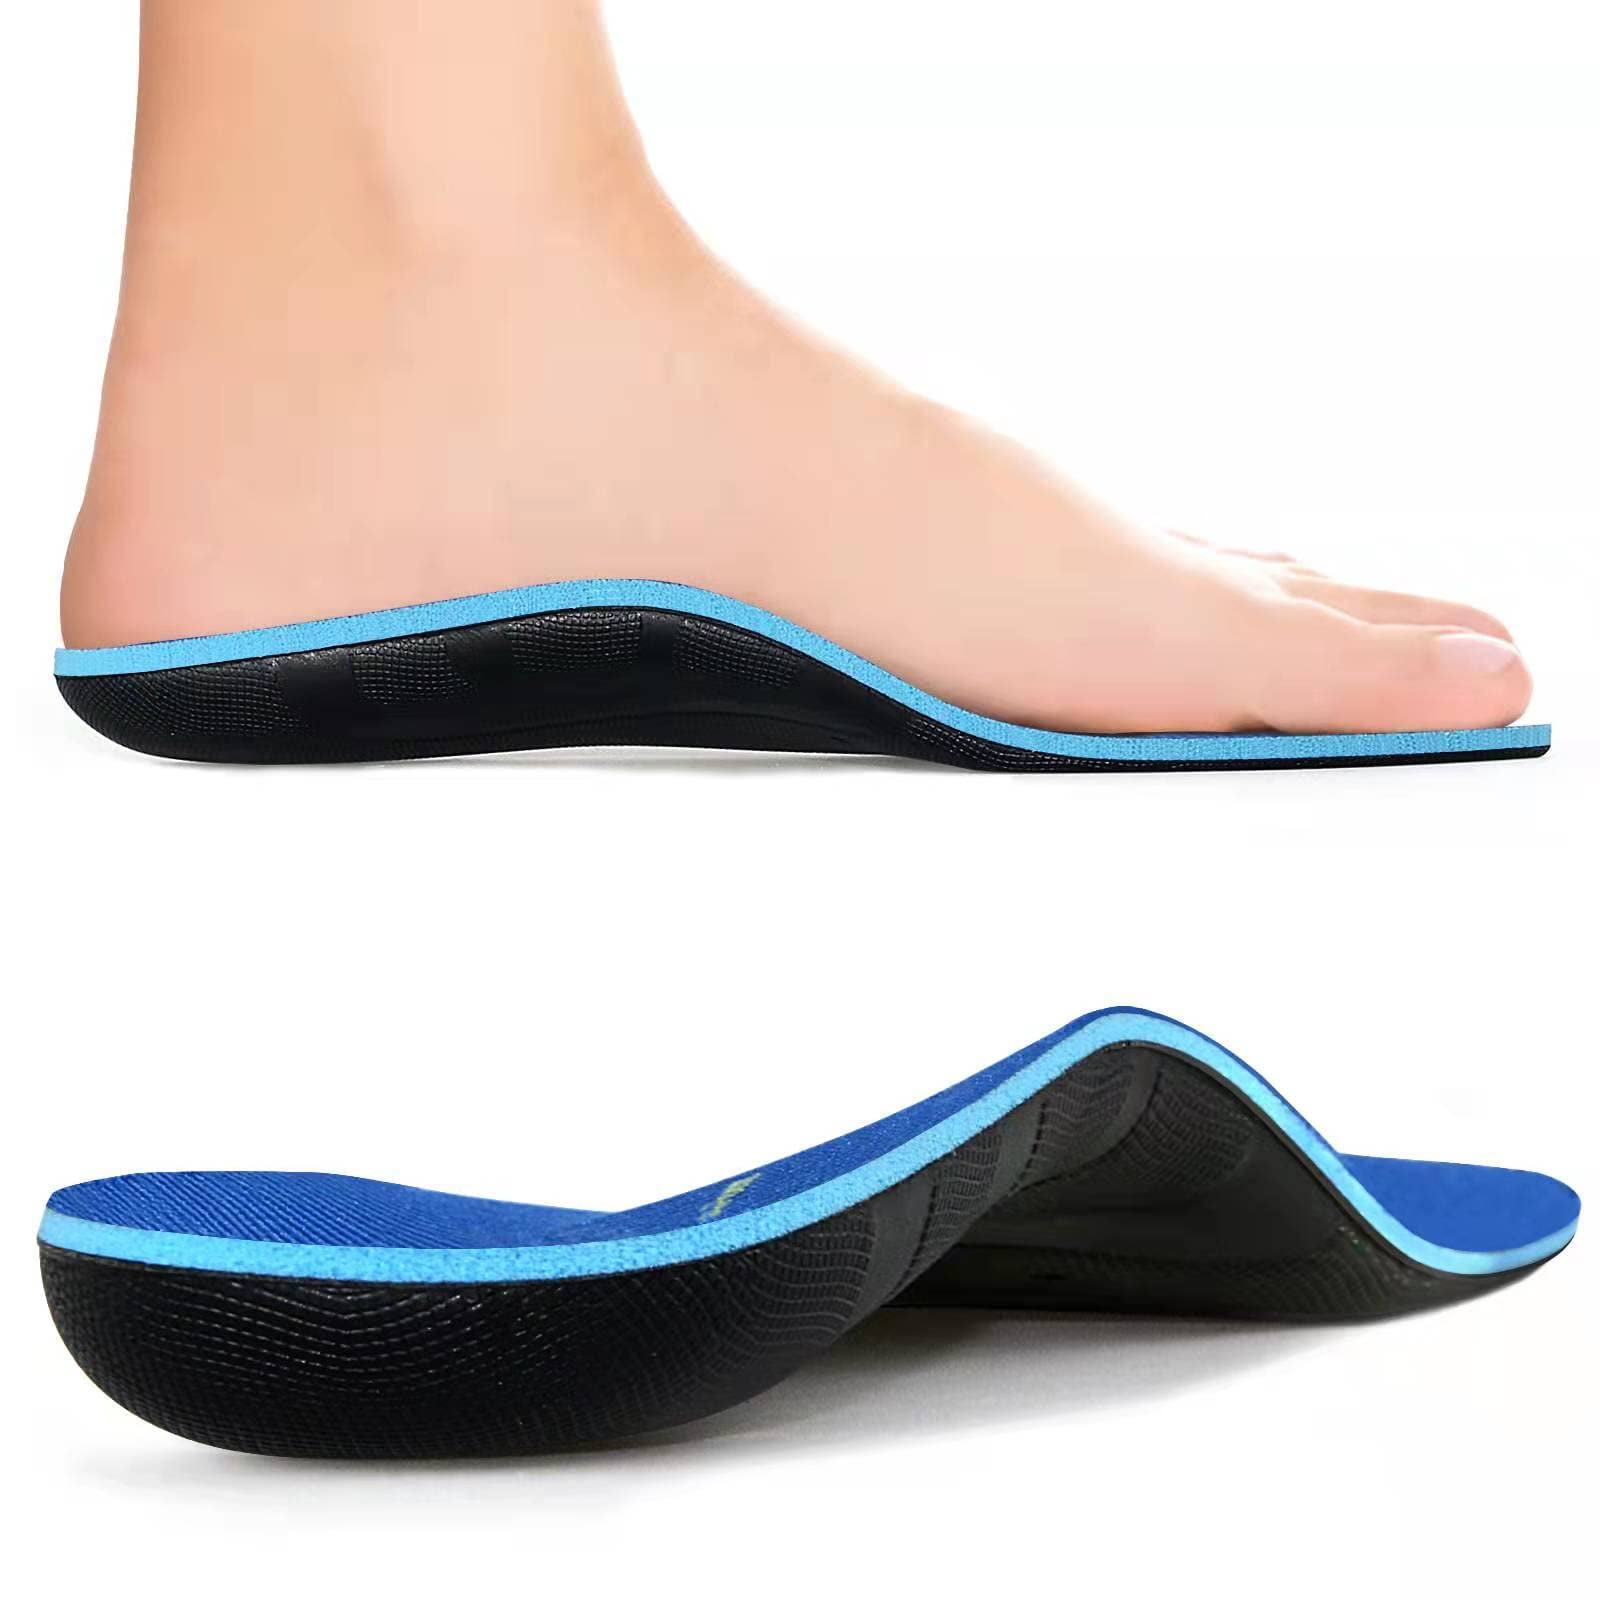 Unisex Shoe Pad Pain Relief Soft Insoles Insert Arch Support Foot Care Tool L 